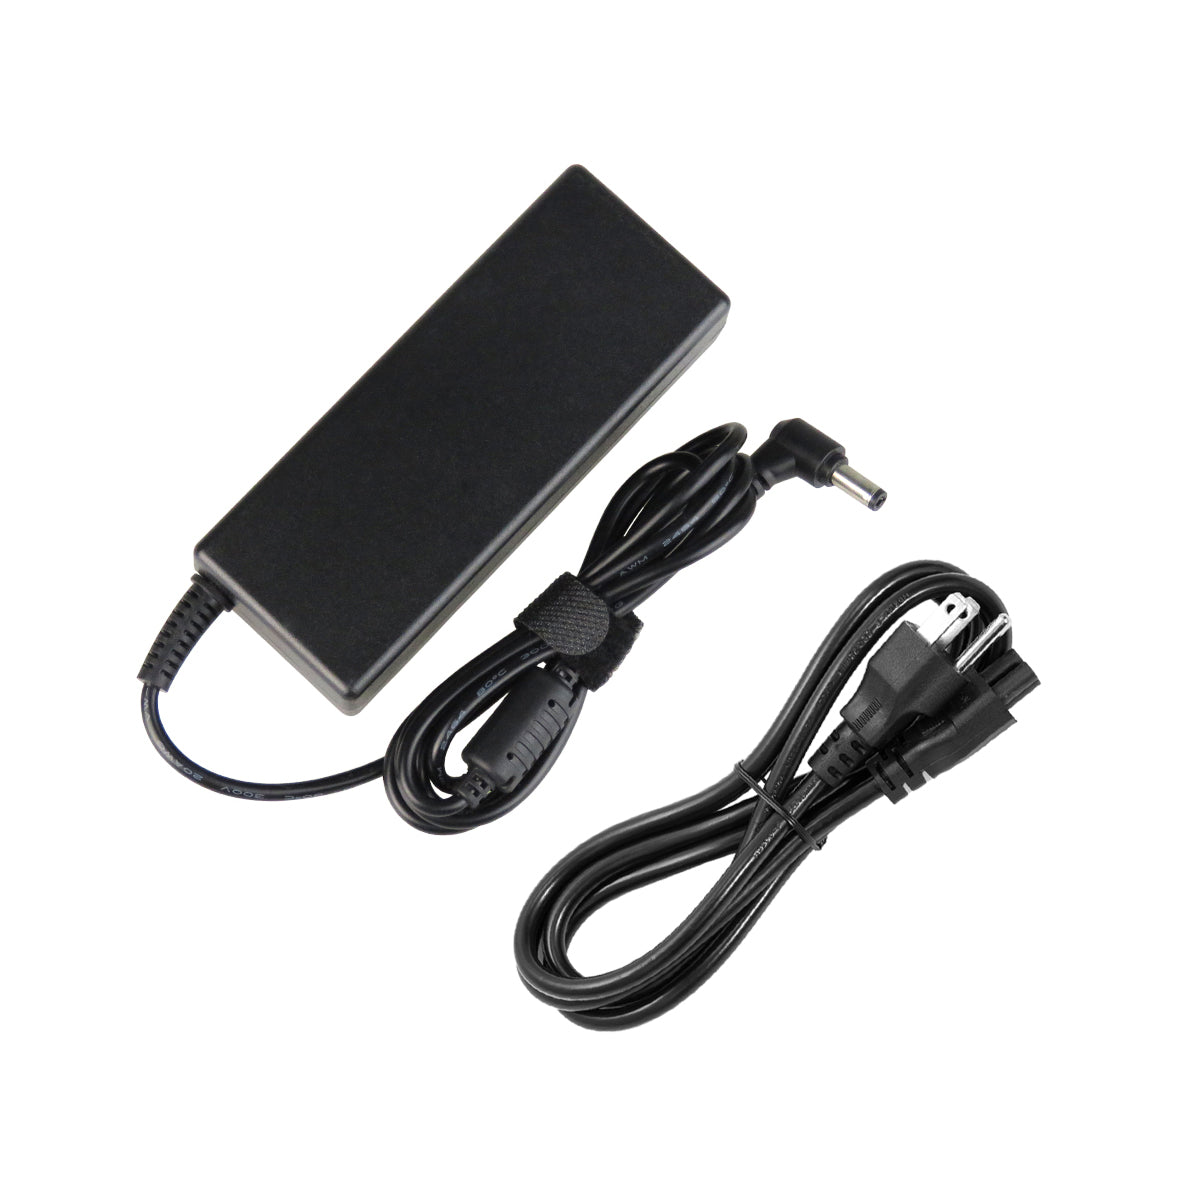 AC Adapter Charger for Toshiba Satellite c55-a5242 Notebook.